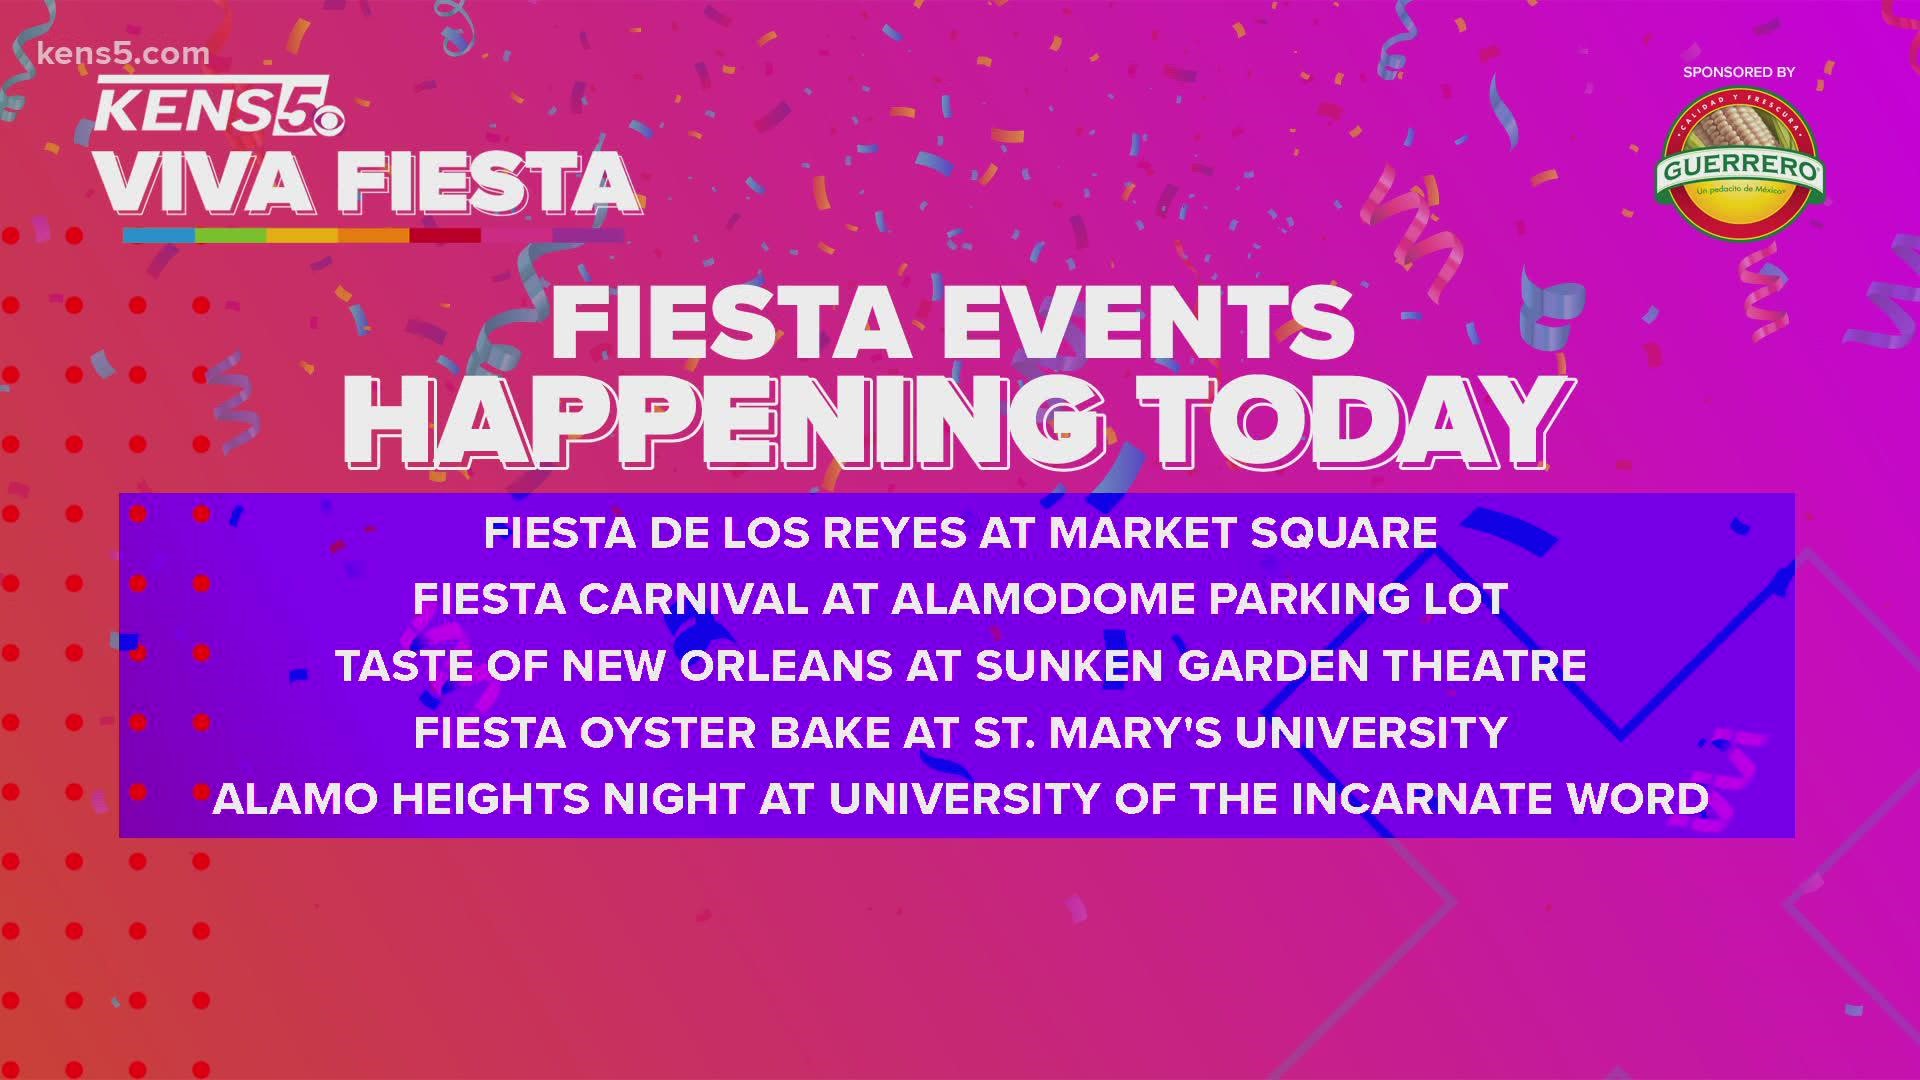 Here are the Fiesta events happening today